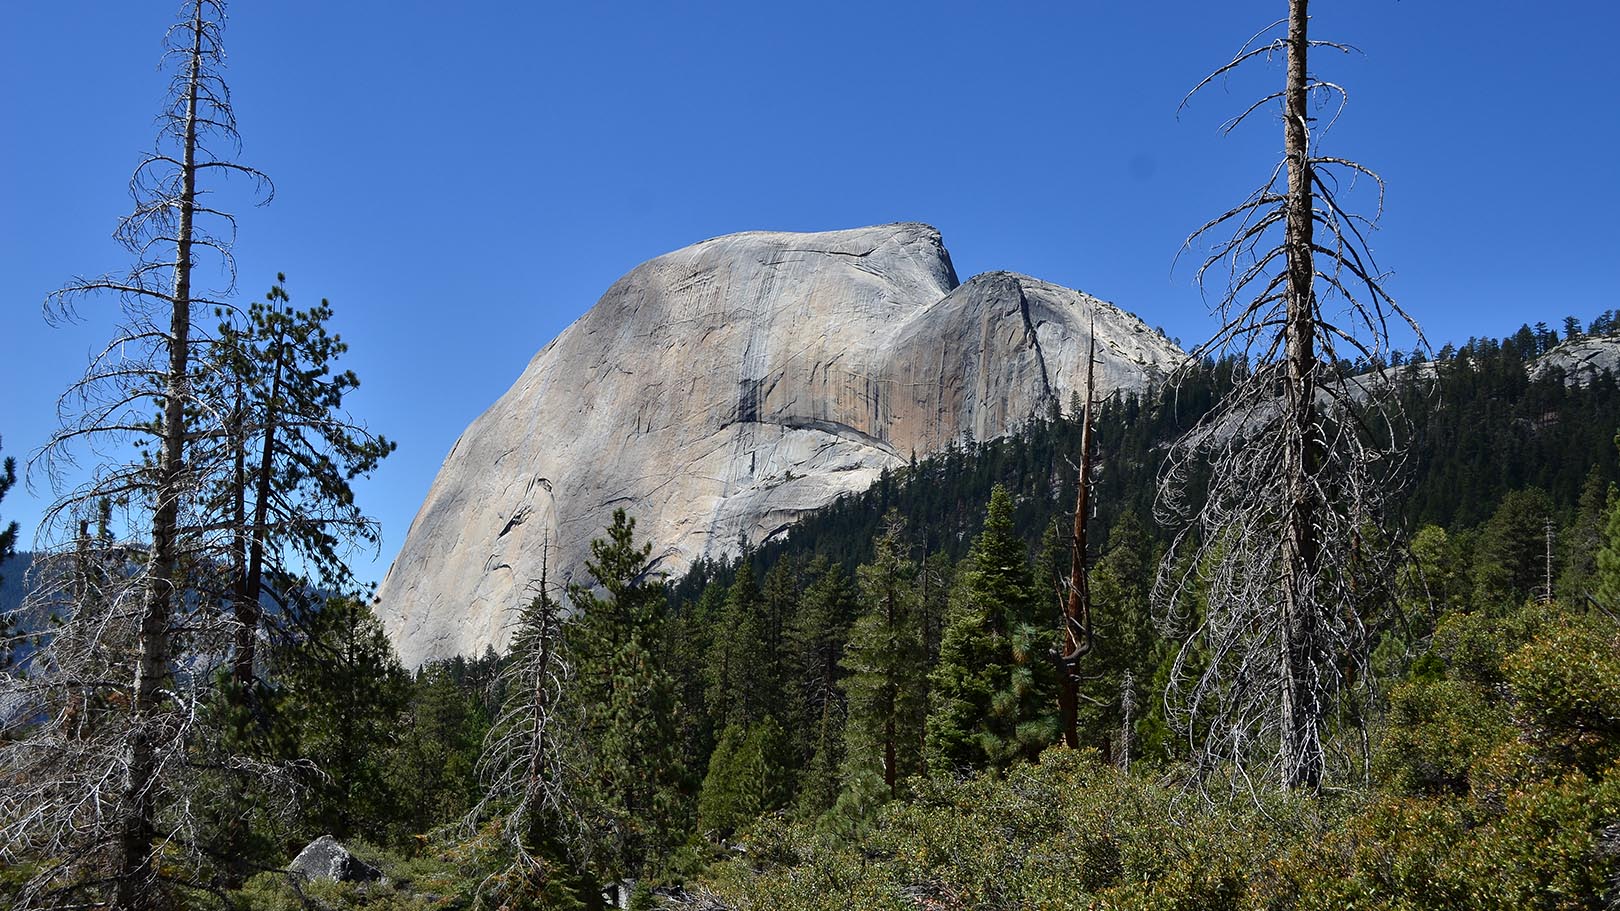 First view of Half Dome